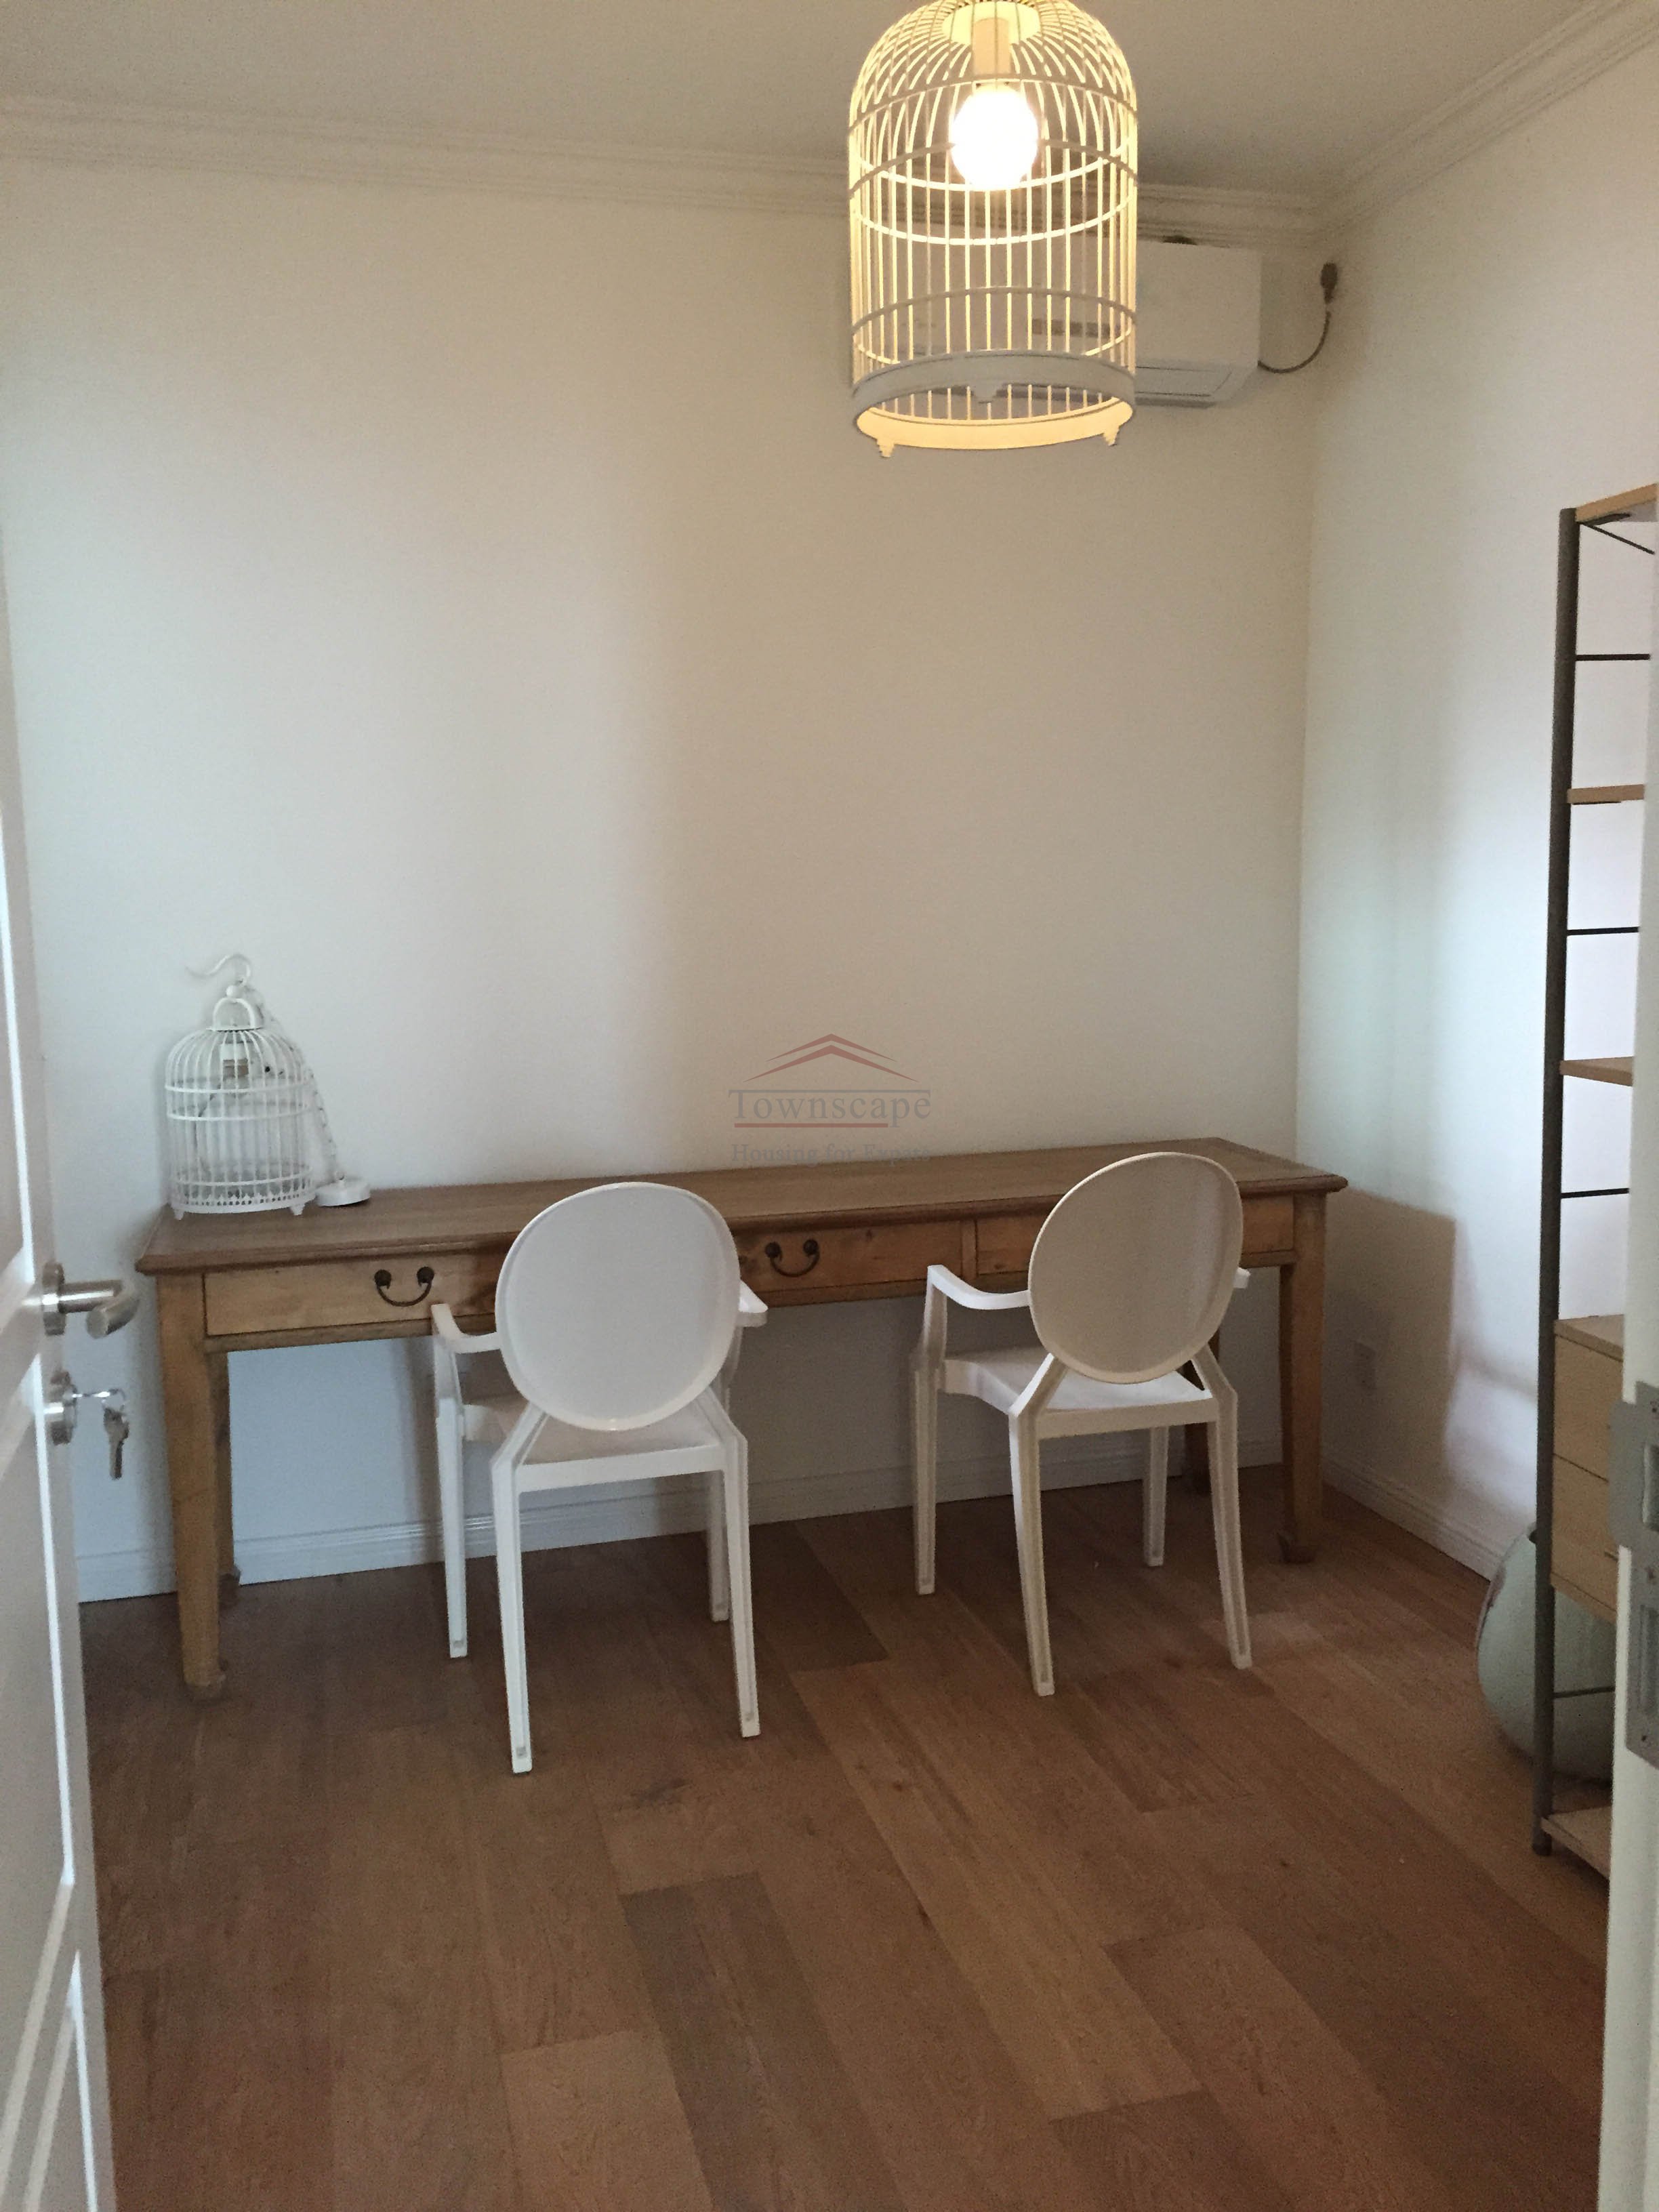 Shanghai apartment Renovated 5 BR Apartment in Central Shanghai Line 1